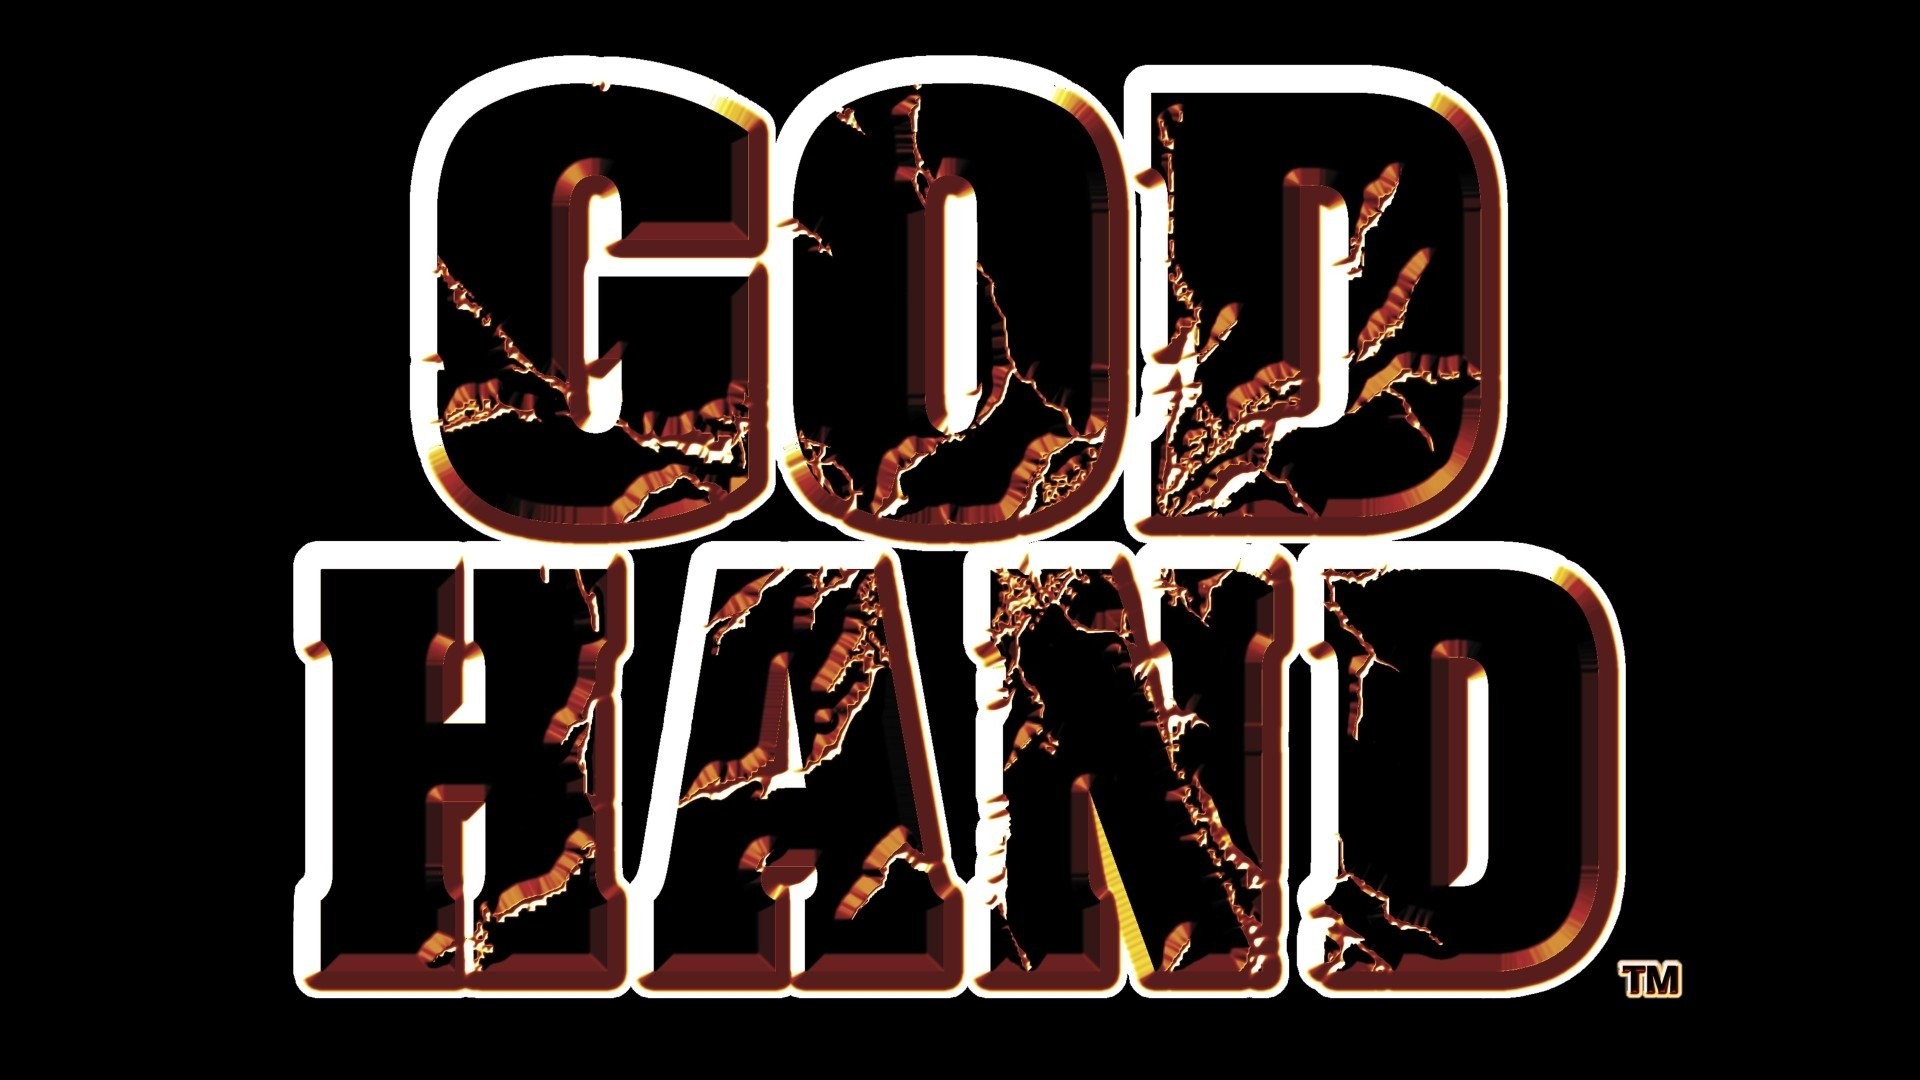 Hand Of God Wallpapers